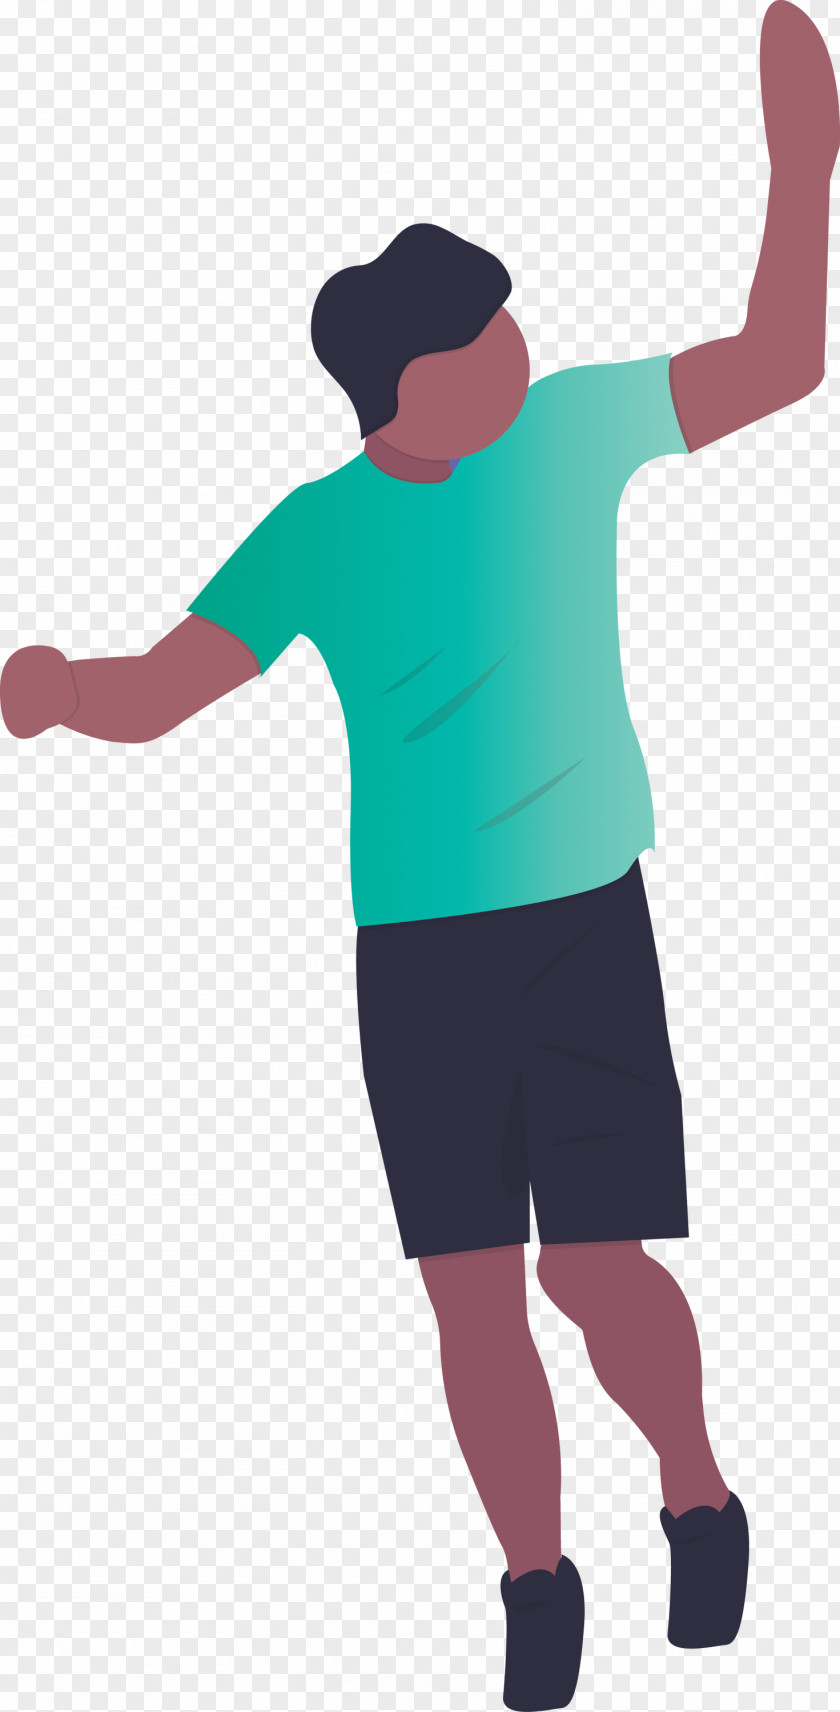 Standing Arm Joint Sleeve Gesture PNG